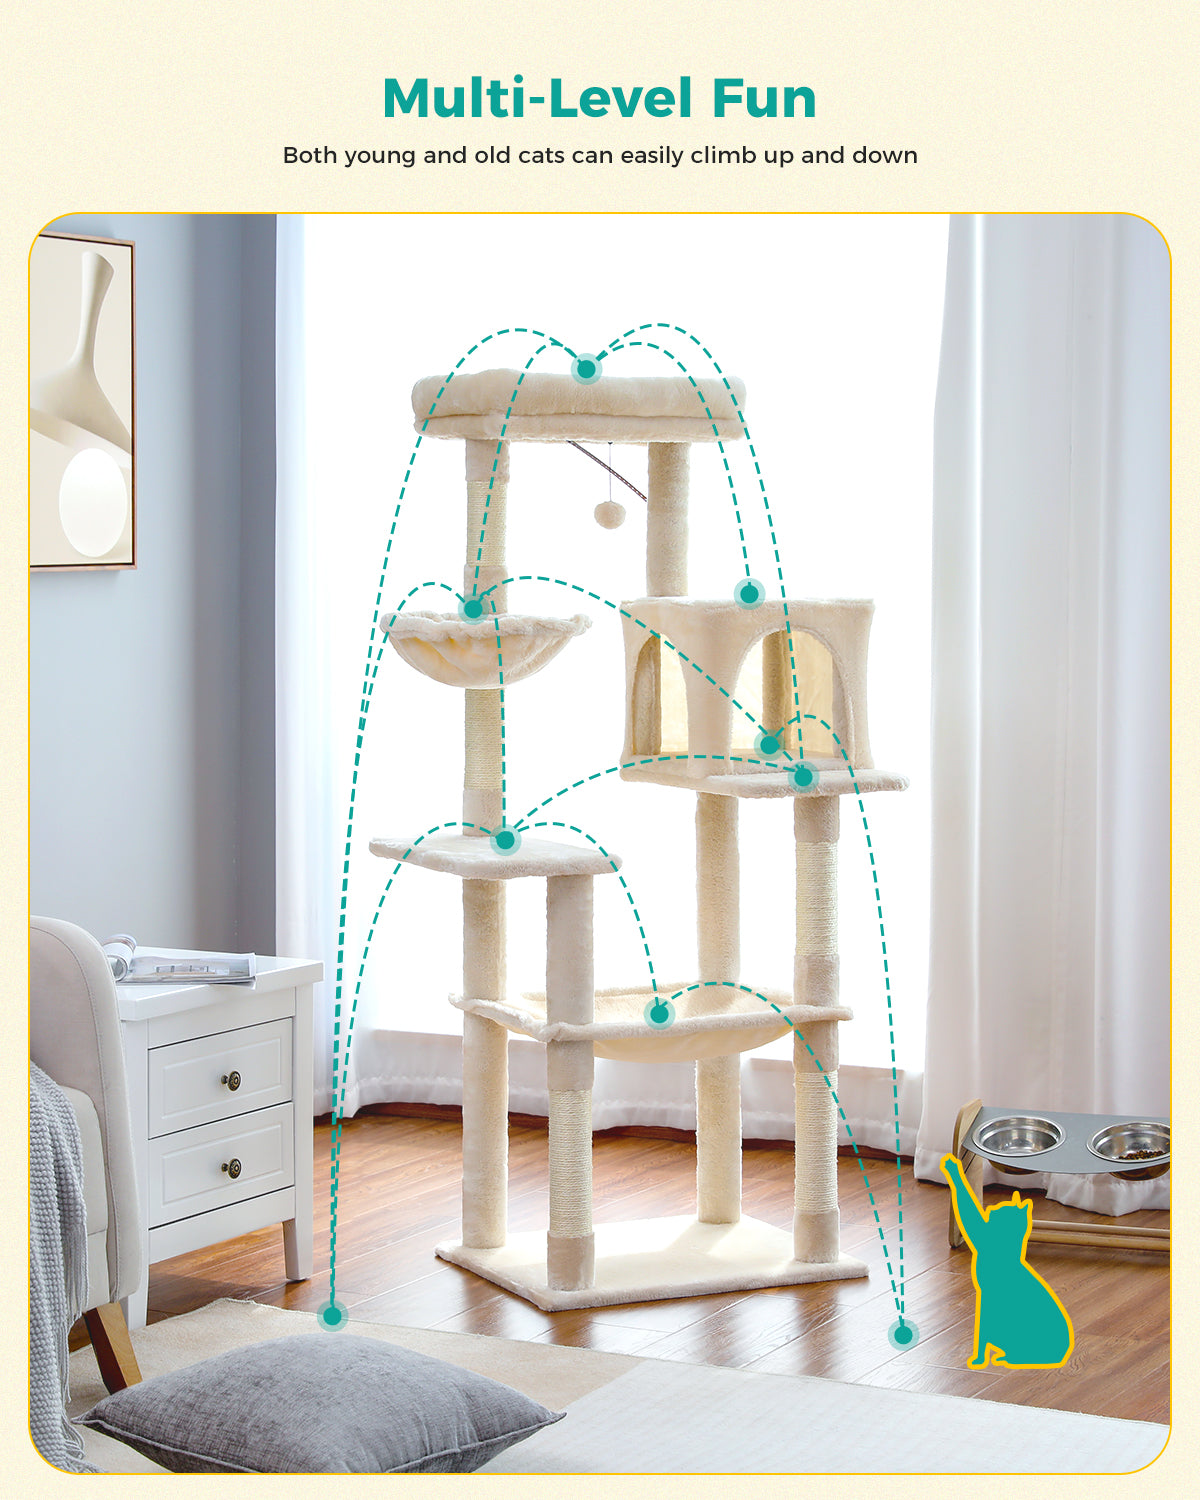 PAWZ Road Cat Tree Scratching Post Tower for Large Cats Play House Condos 143cm Beige